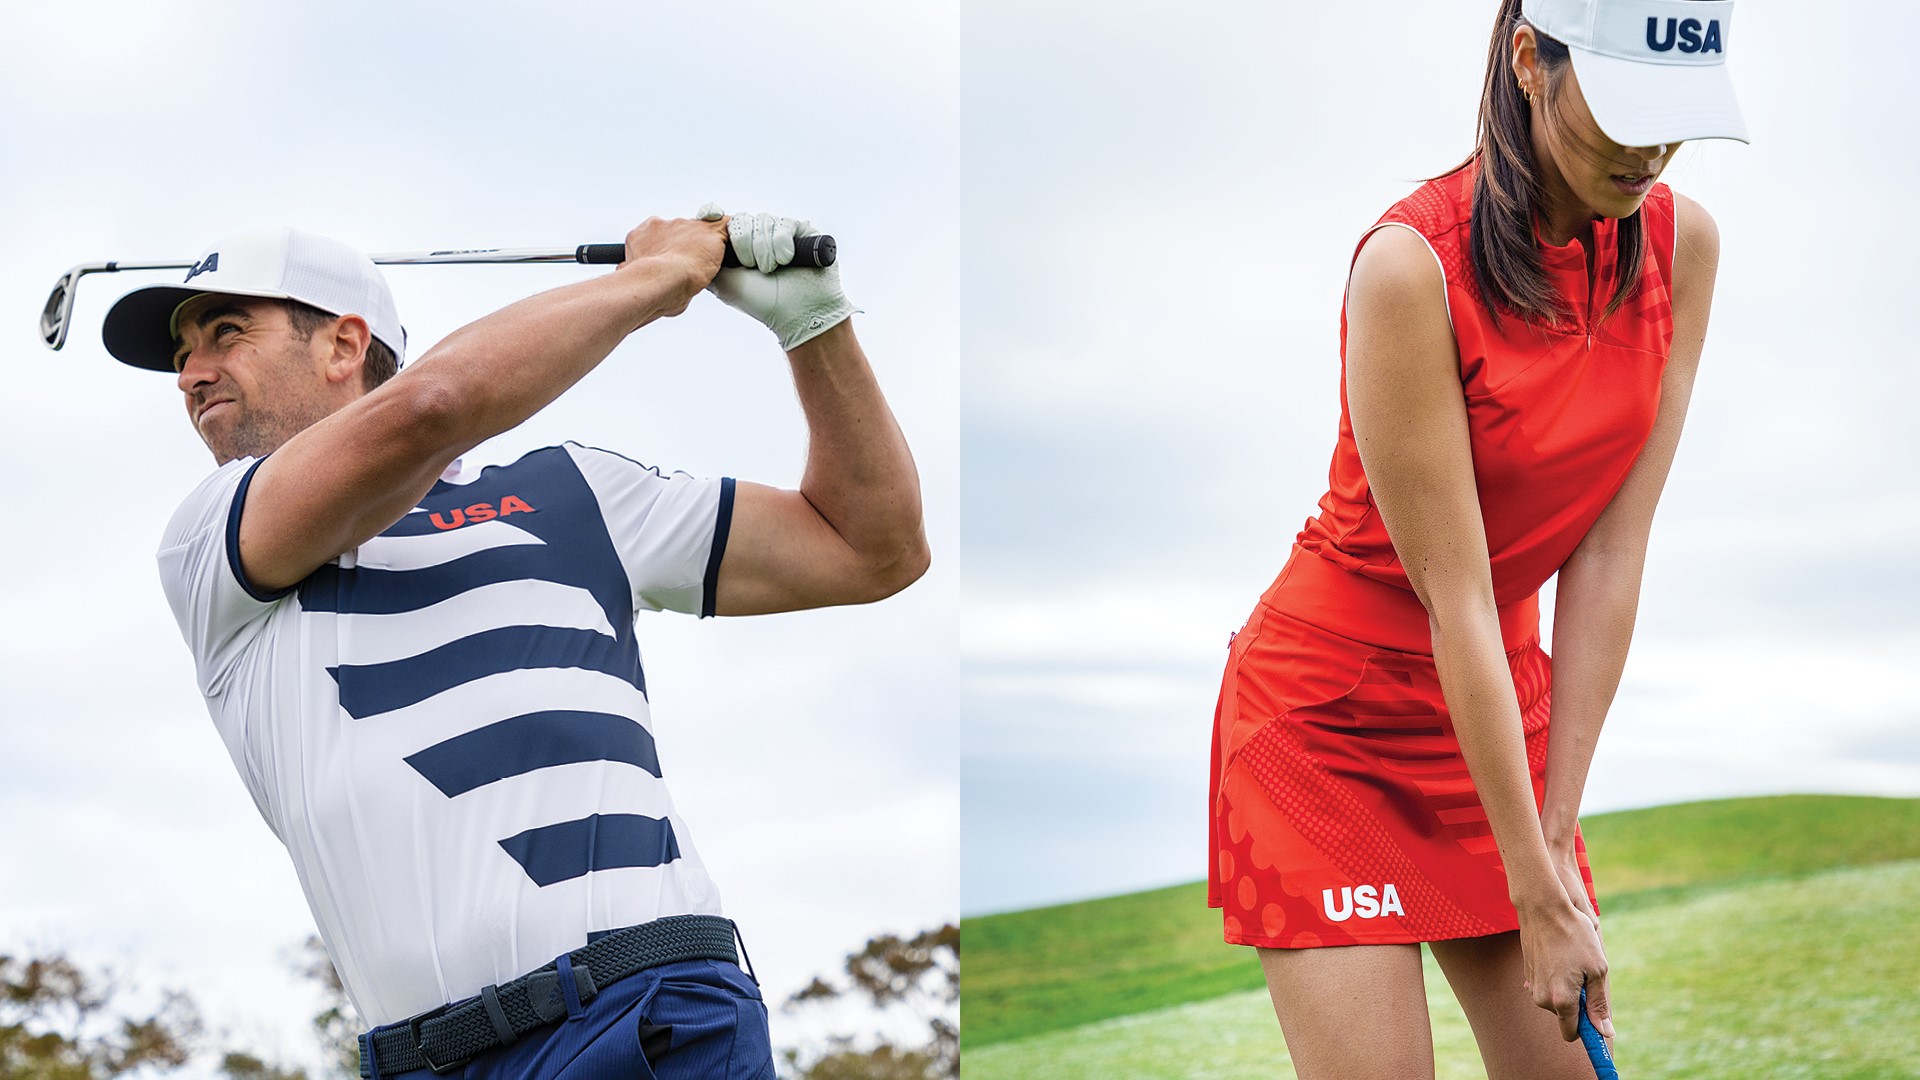 ADIDAS UNVEILS THE OFFICIAL UNIFORMS FOR USA GOLF LinksNation